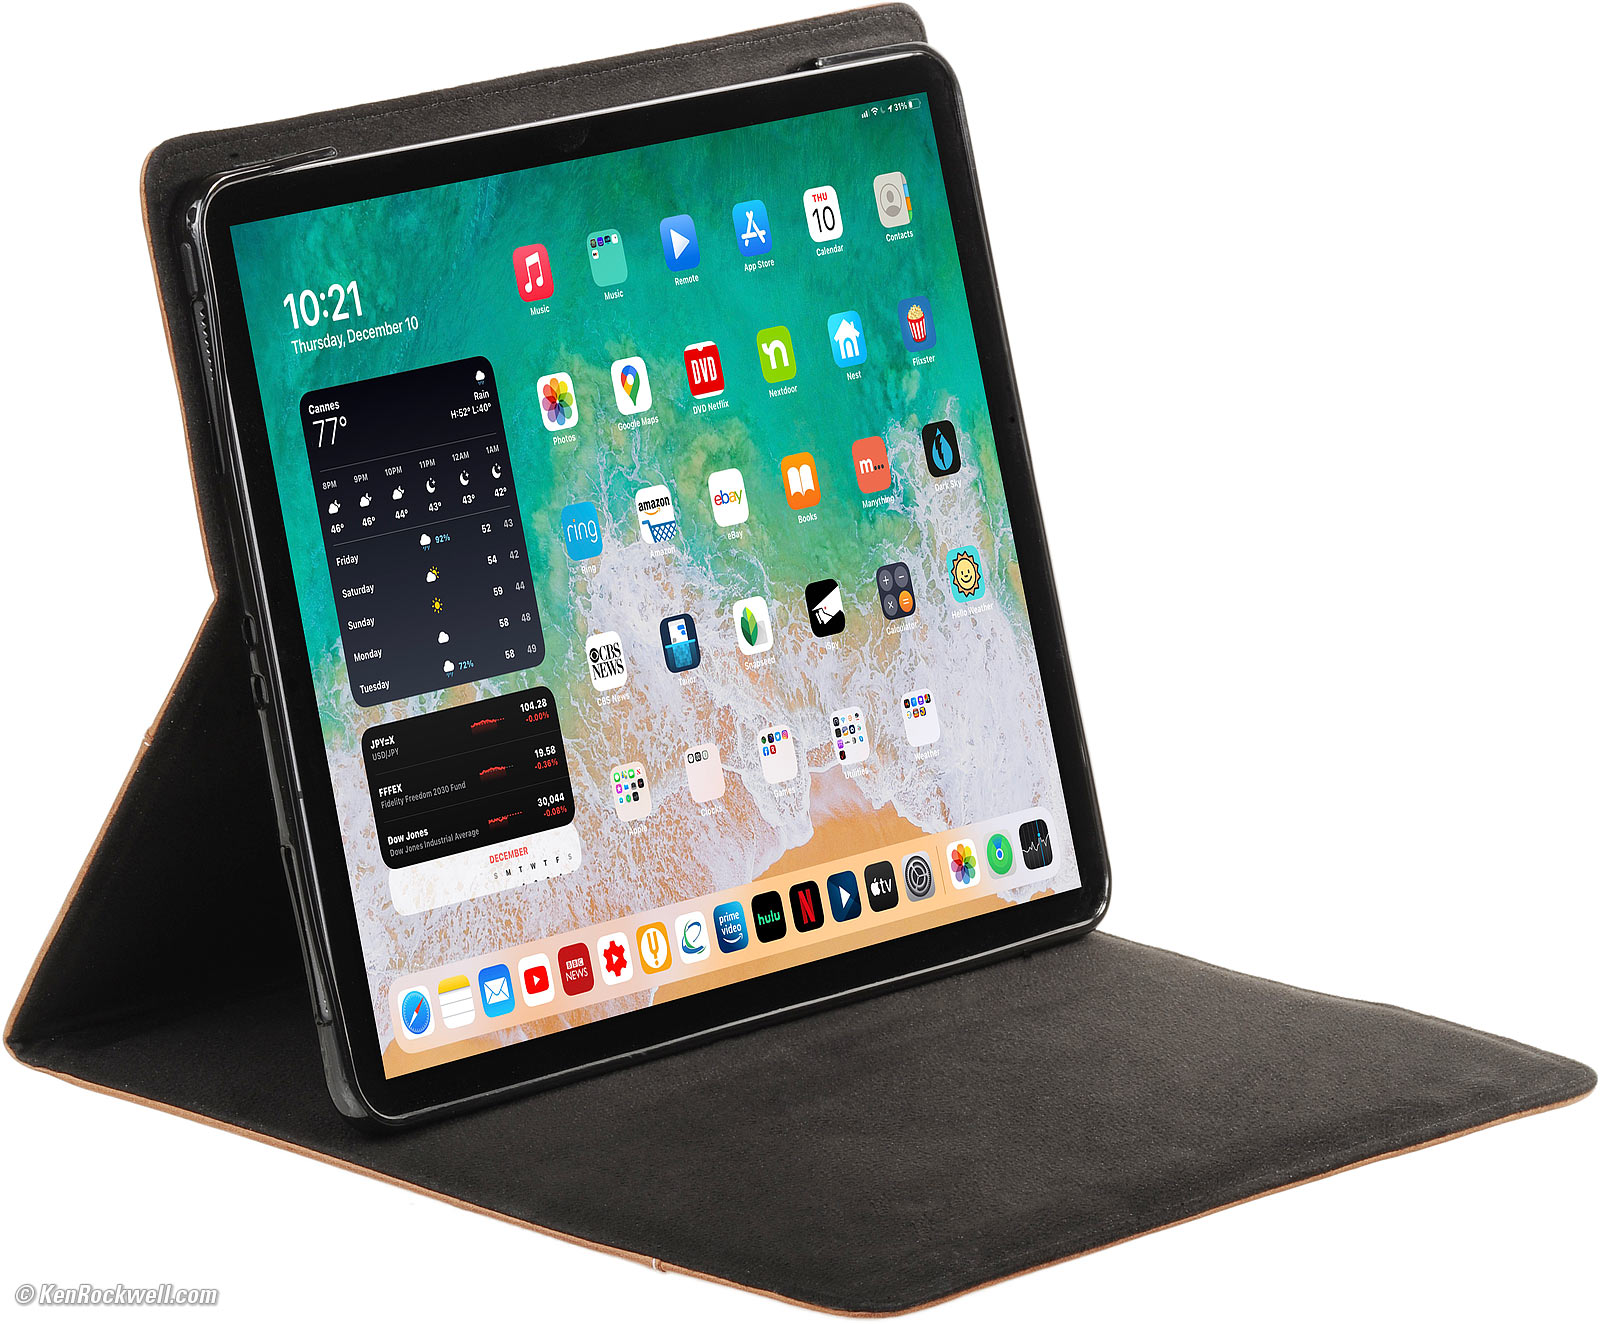 MacCase Premium Leather 2021 iPad Pro 12.9 5th Generation Folio Case with Magnetic Accessory System - Vintage